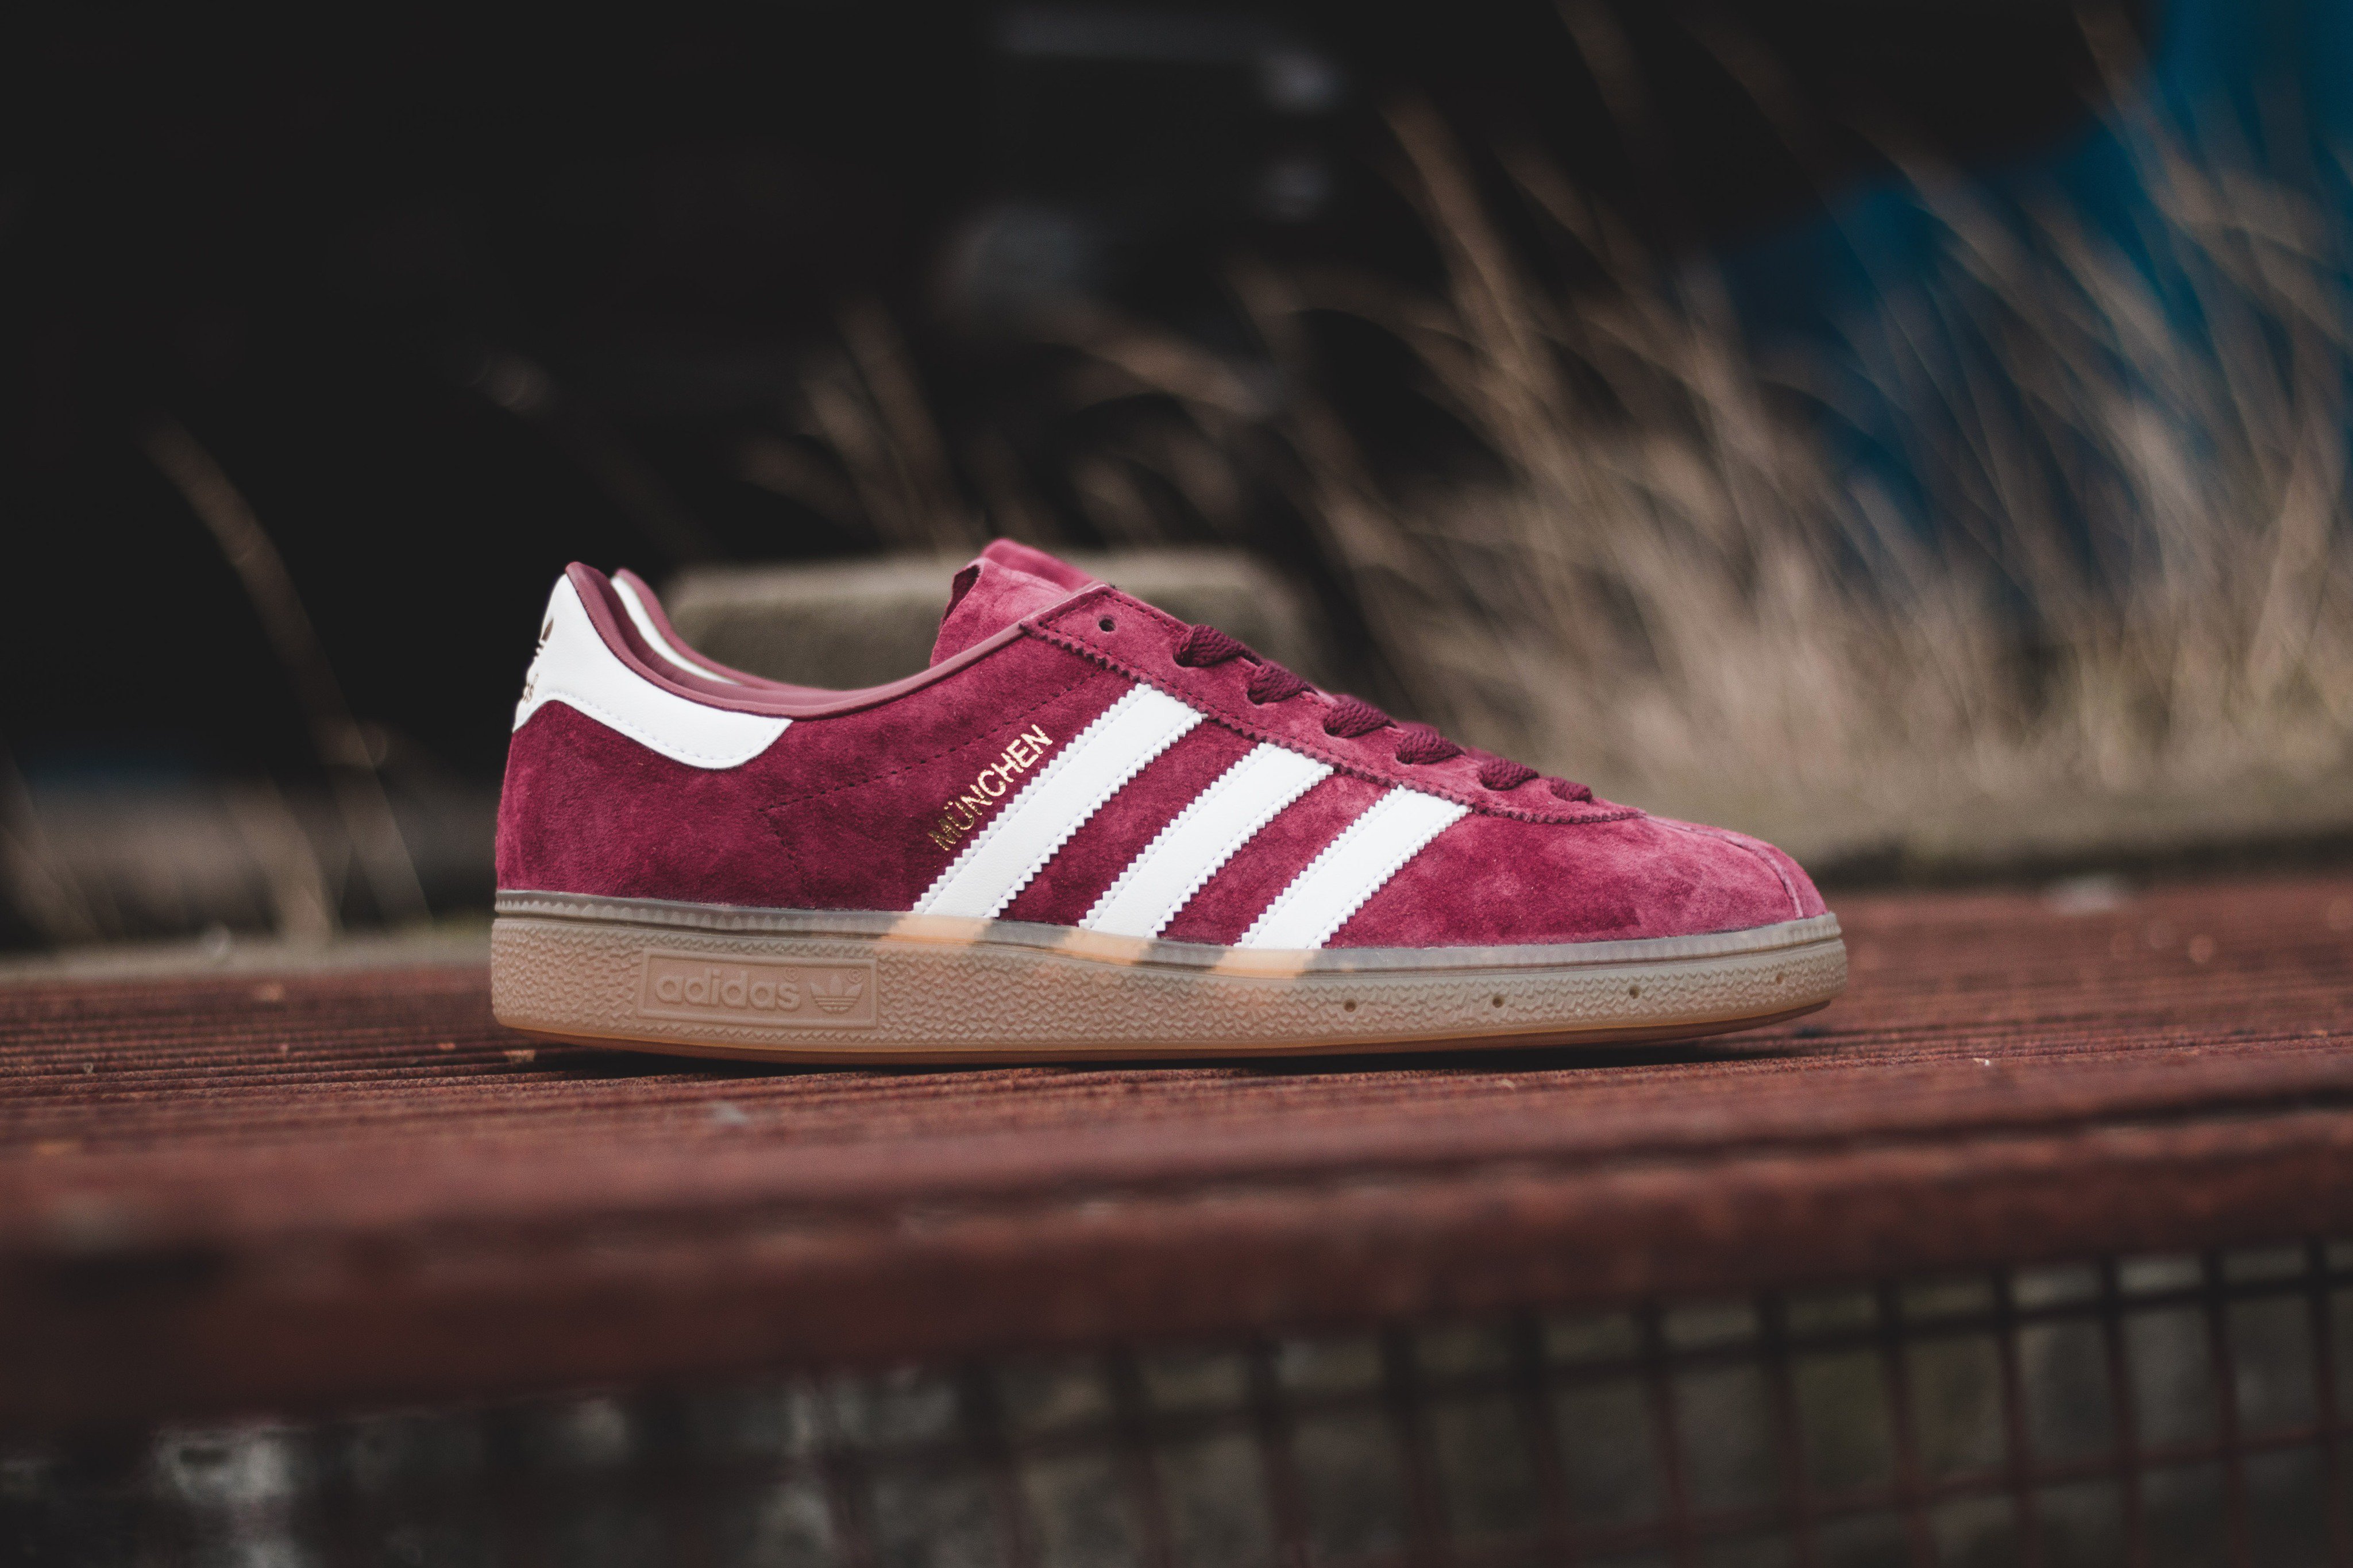 HANON on Twitter: "adidas Munchen "Burgundy" is available to buy ONLINE now! #adidas #munchen https://t.co/kU6AigS00W https://t.co/gQDfQkcvAK" Twitter